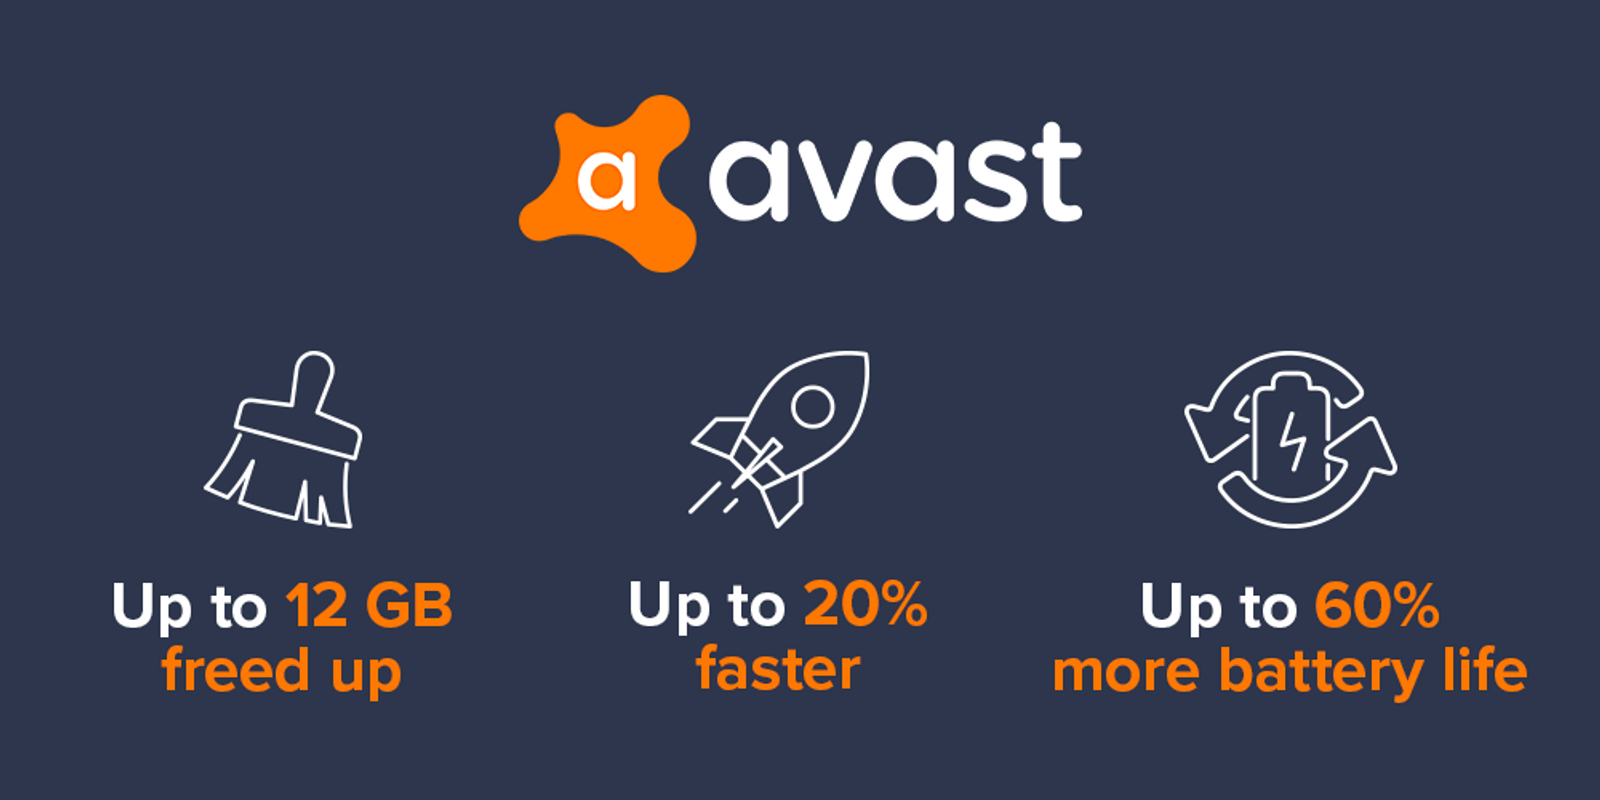 avast browser cleanup does not working